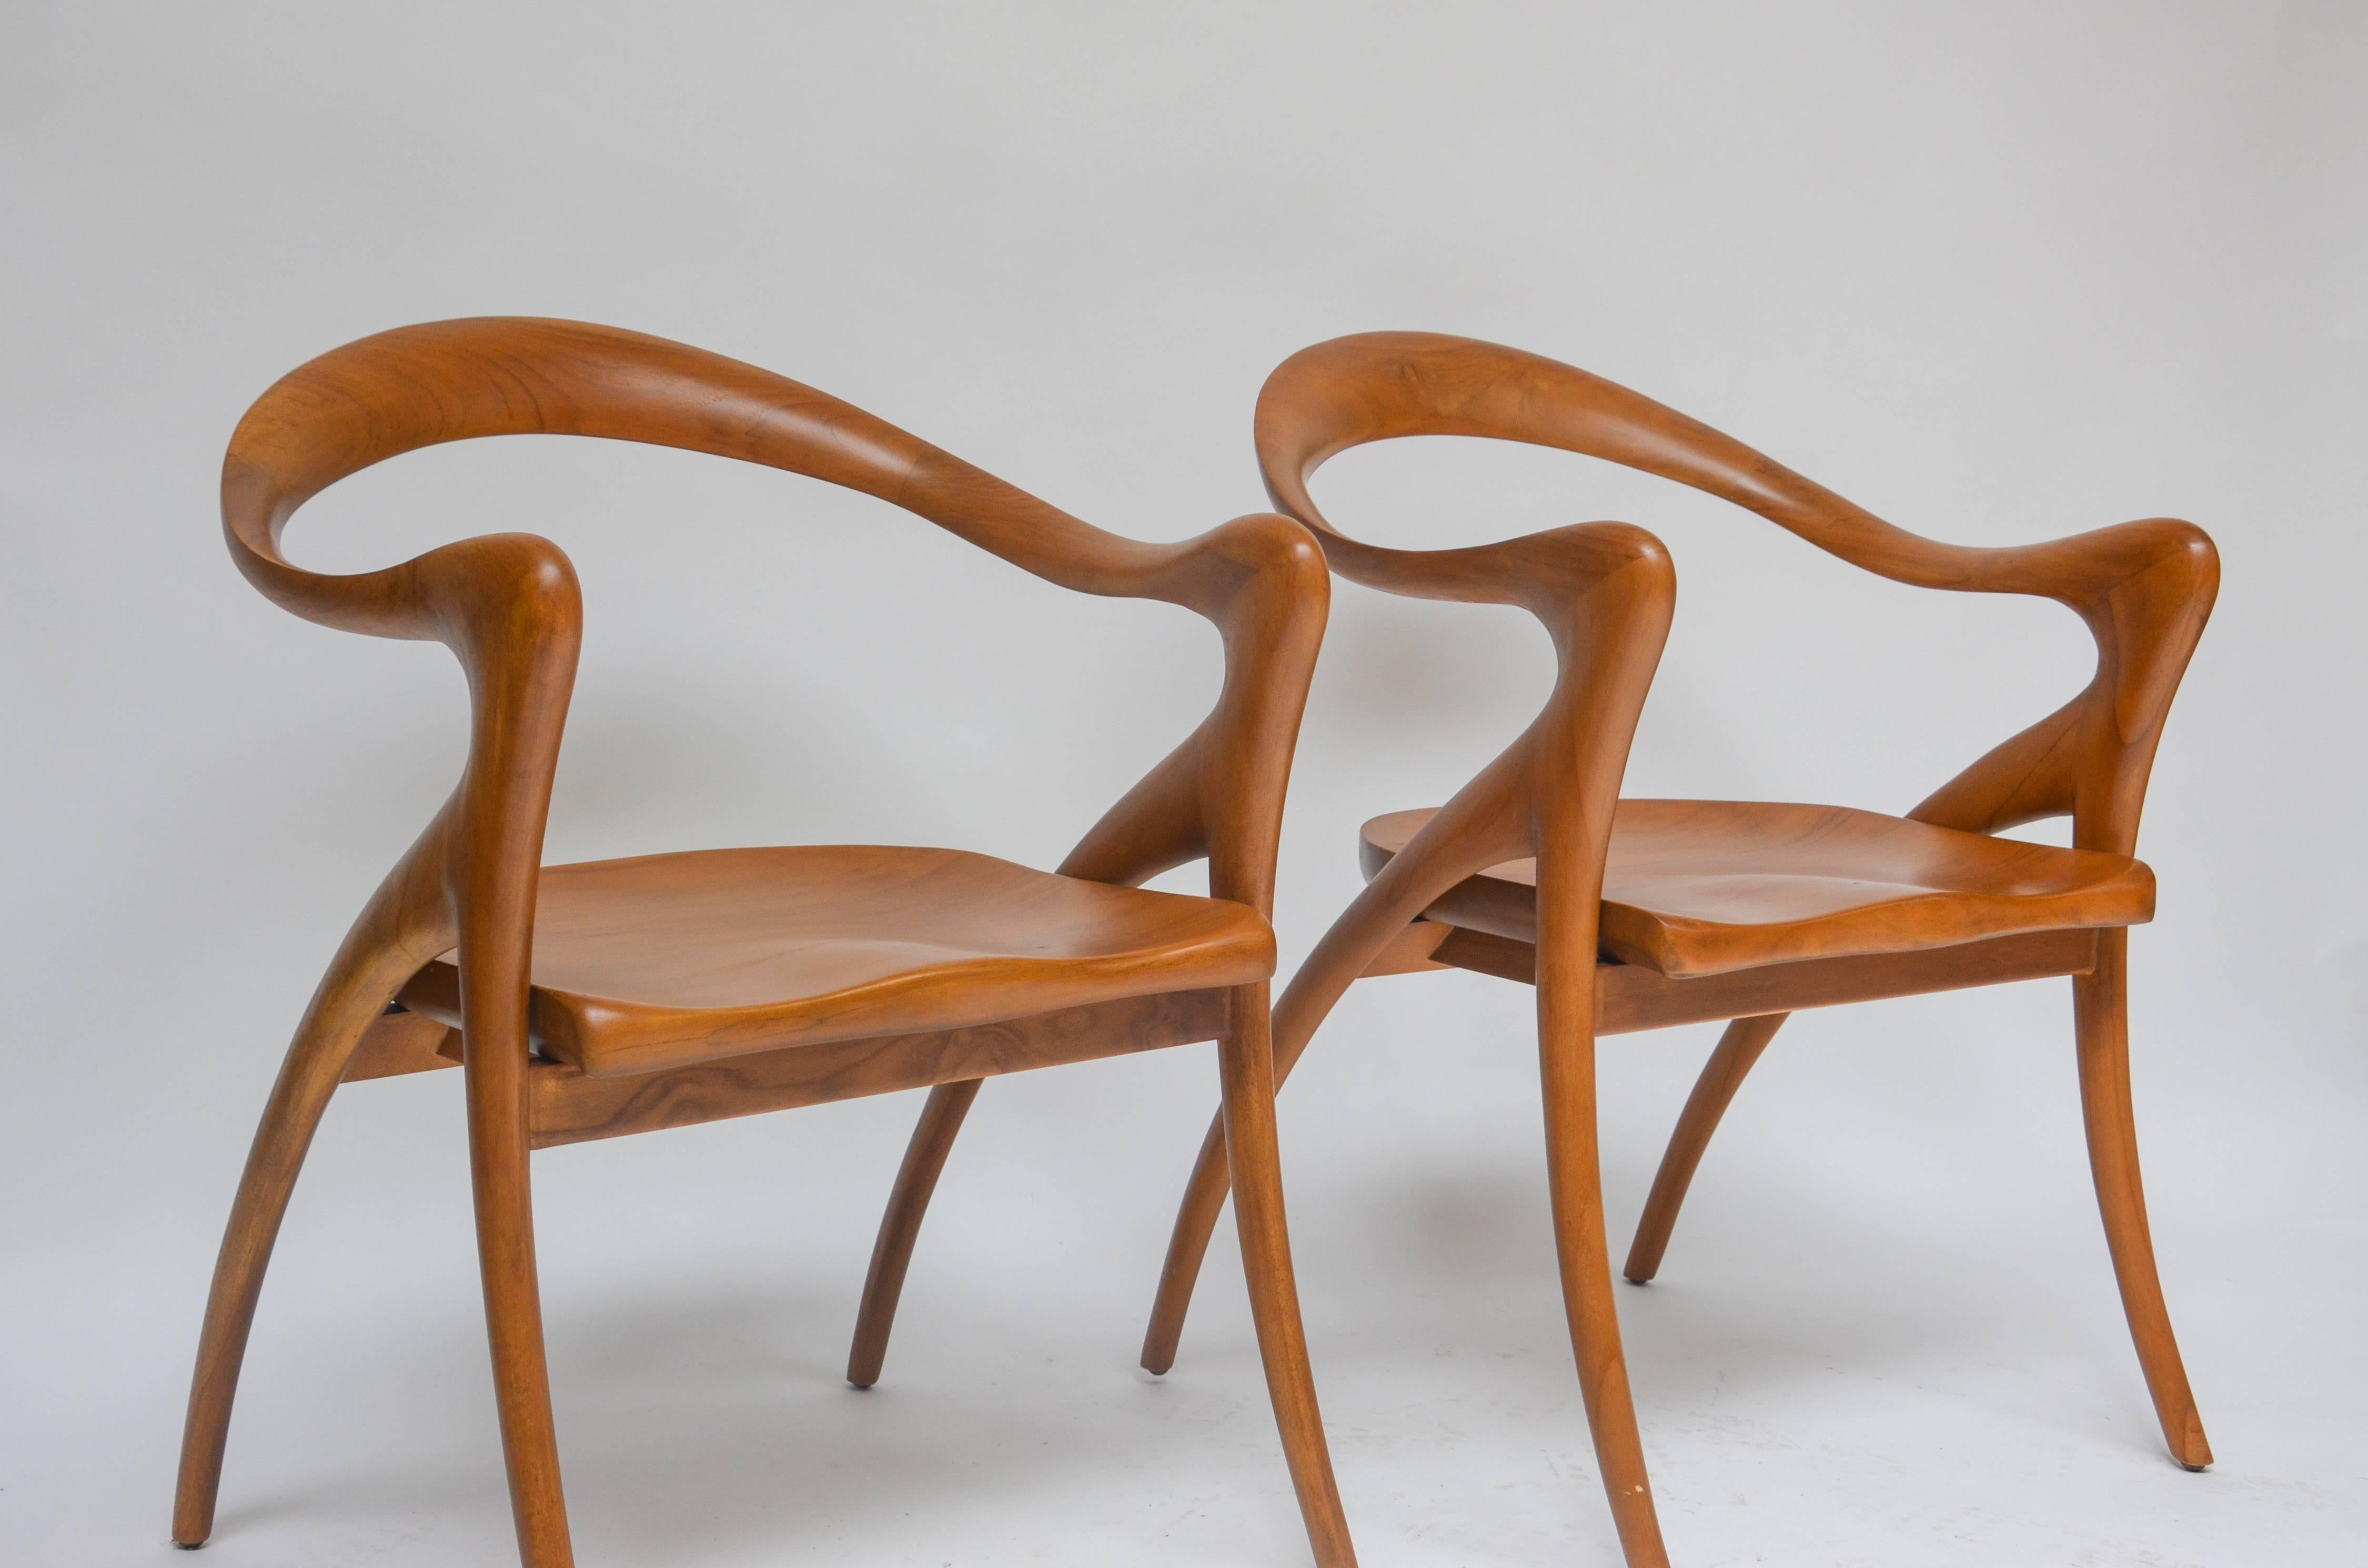 Set of two organic neo-vintage, hand carved, teak armchairs. Designed by Olivier De Schrijver. Excellent condition.